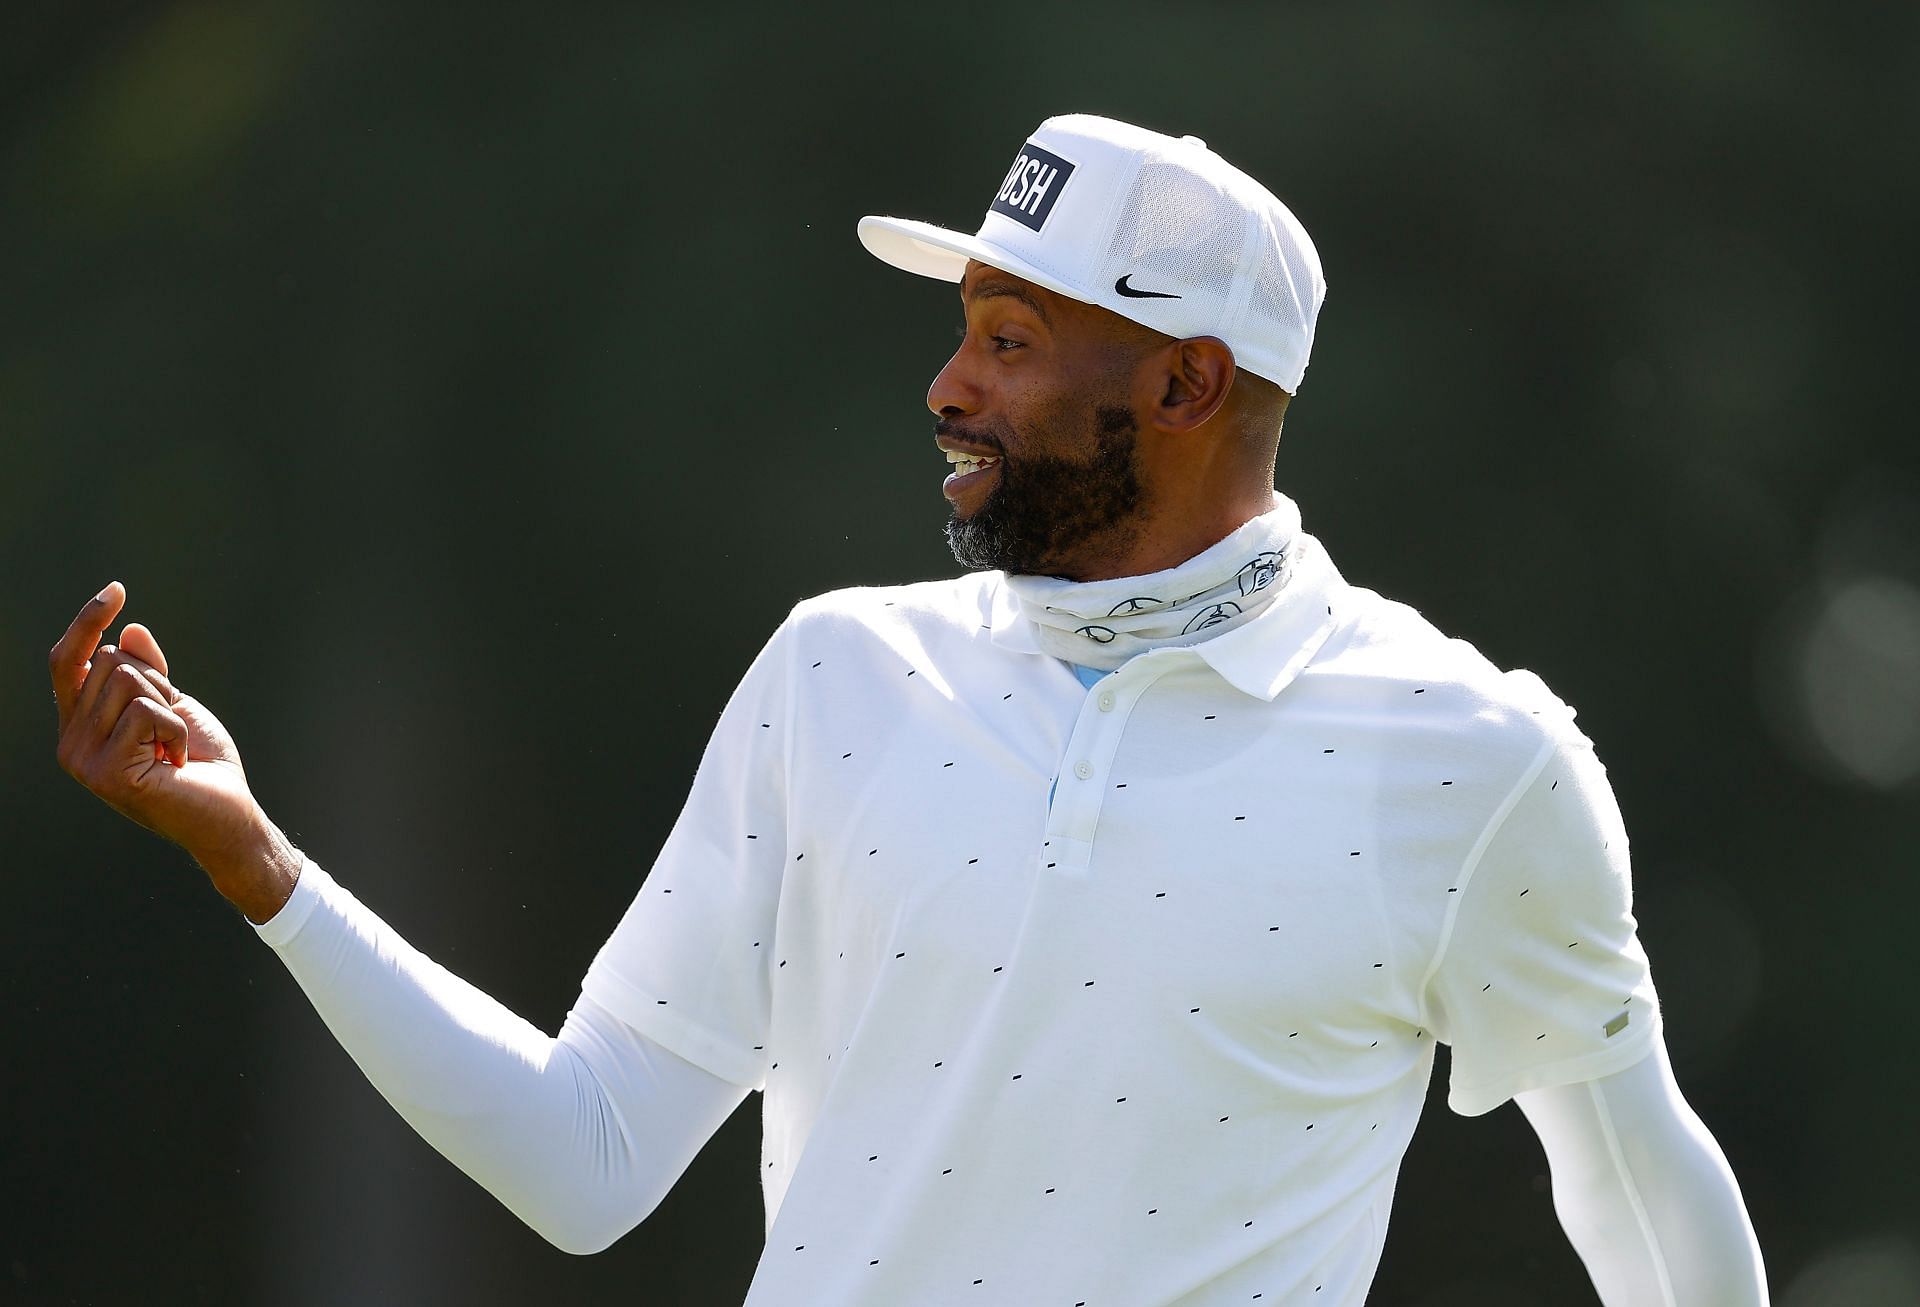 Vince Carter at the TOUR Championship - Preview Day 3